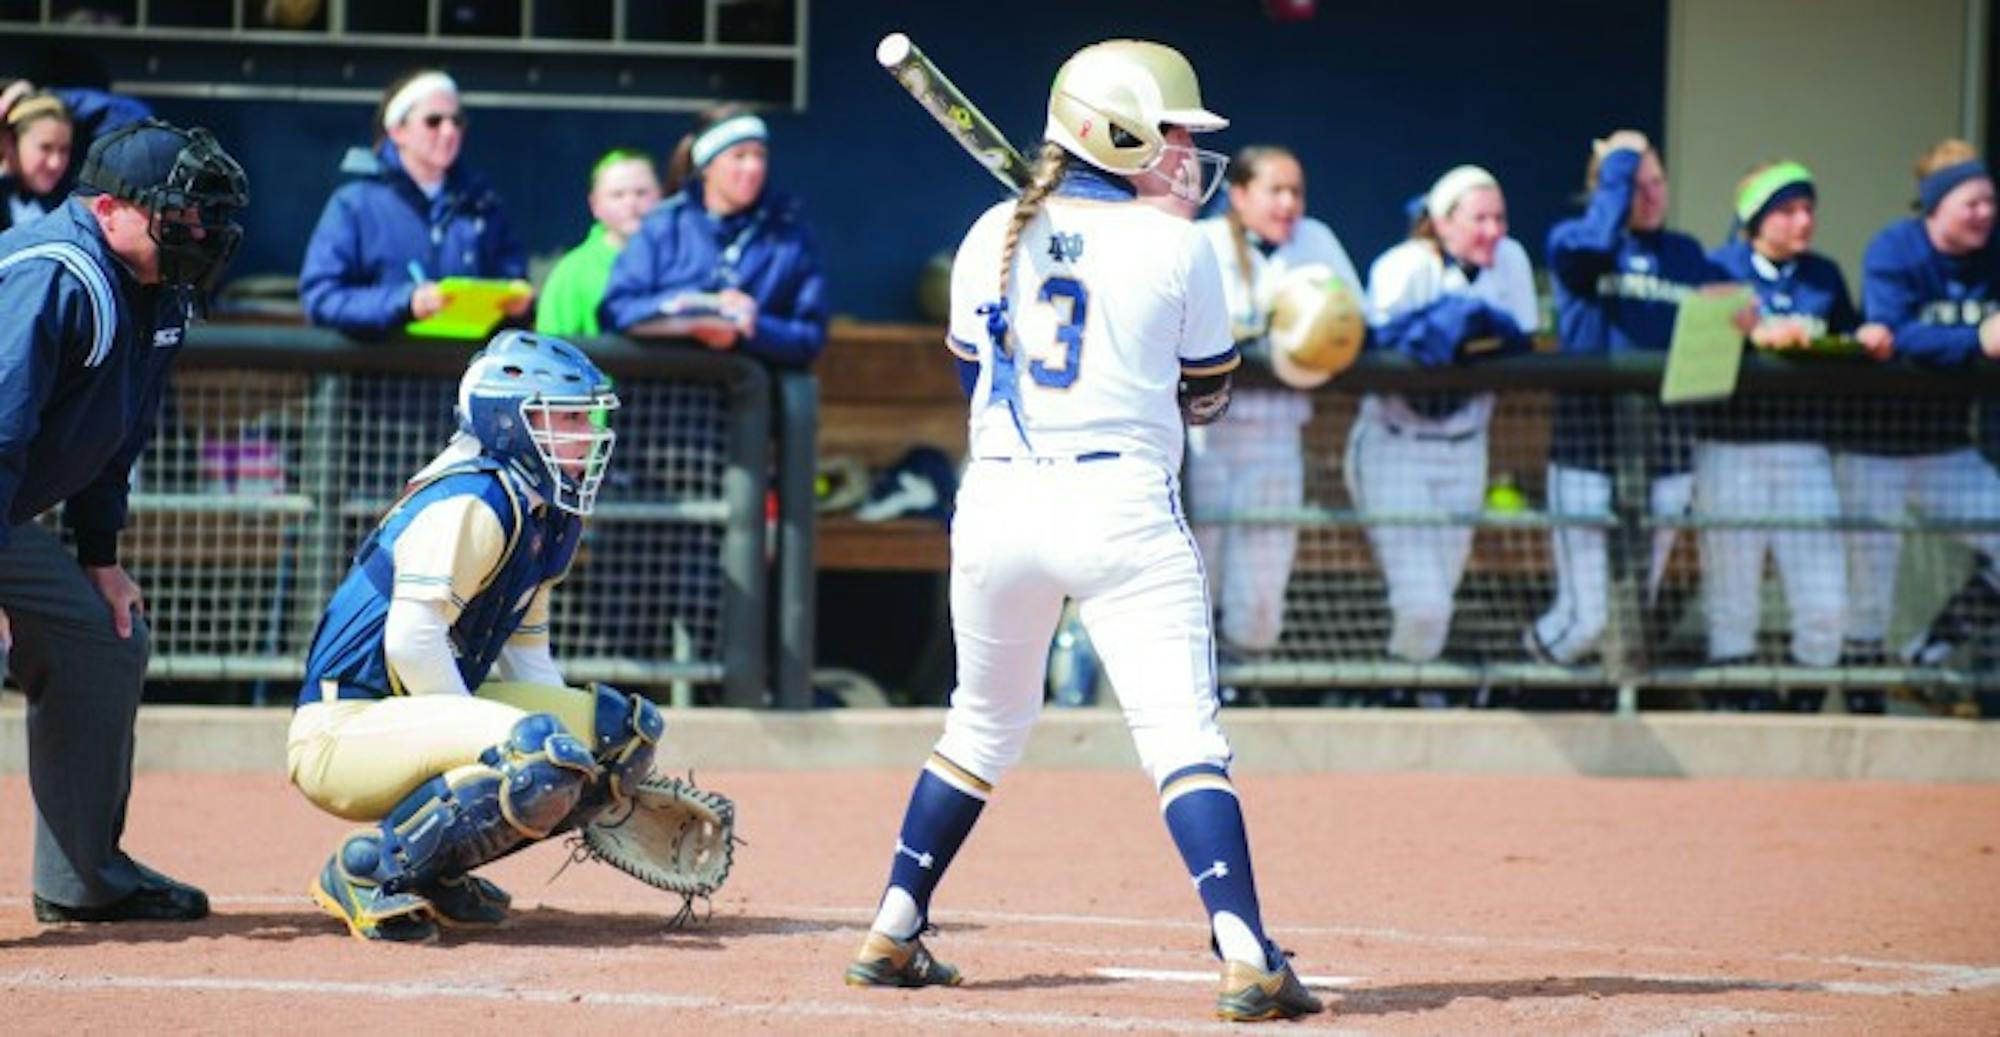 Senior outfielder and two-time All American Emilee Koerner steps up to bat during the March 31 win against Georgia Tech.